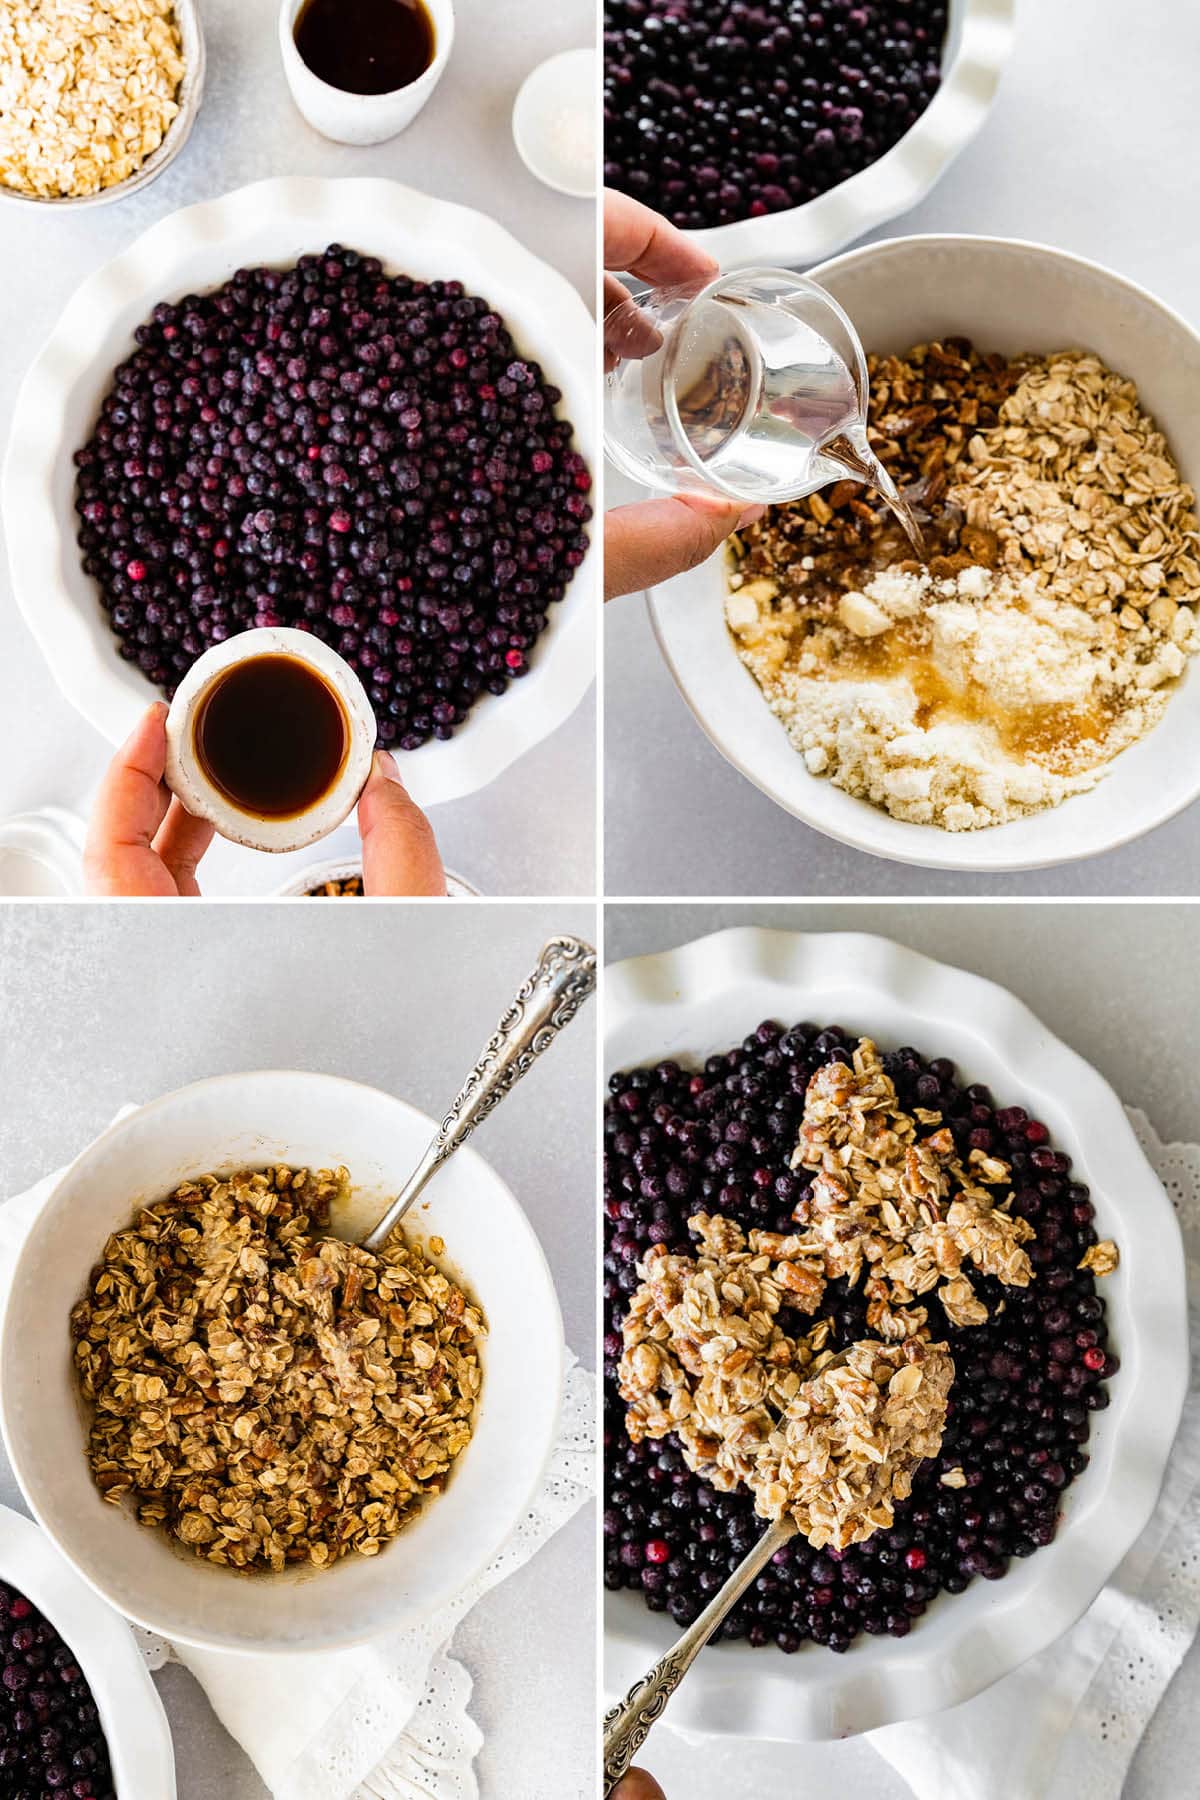 Collage of four photos showing how to make Healthy Blueberry Crumble: adding vanilla to the berries and topping the berries with a crumble in a pie dish.